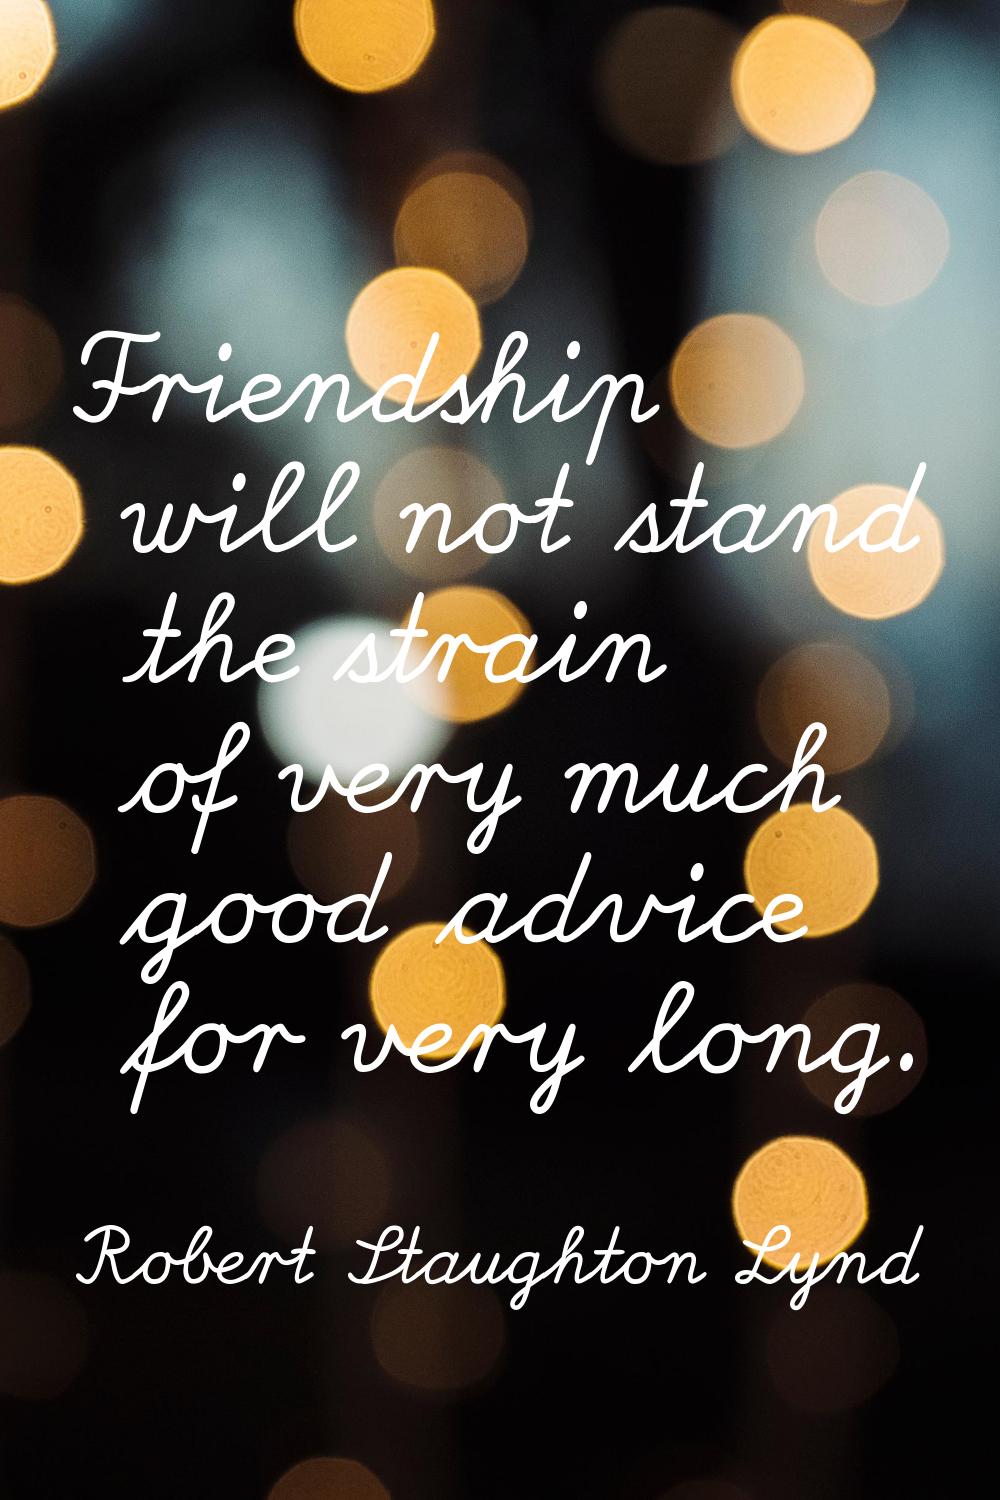 Friendship will not stand the strain of very much good advice for very long.